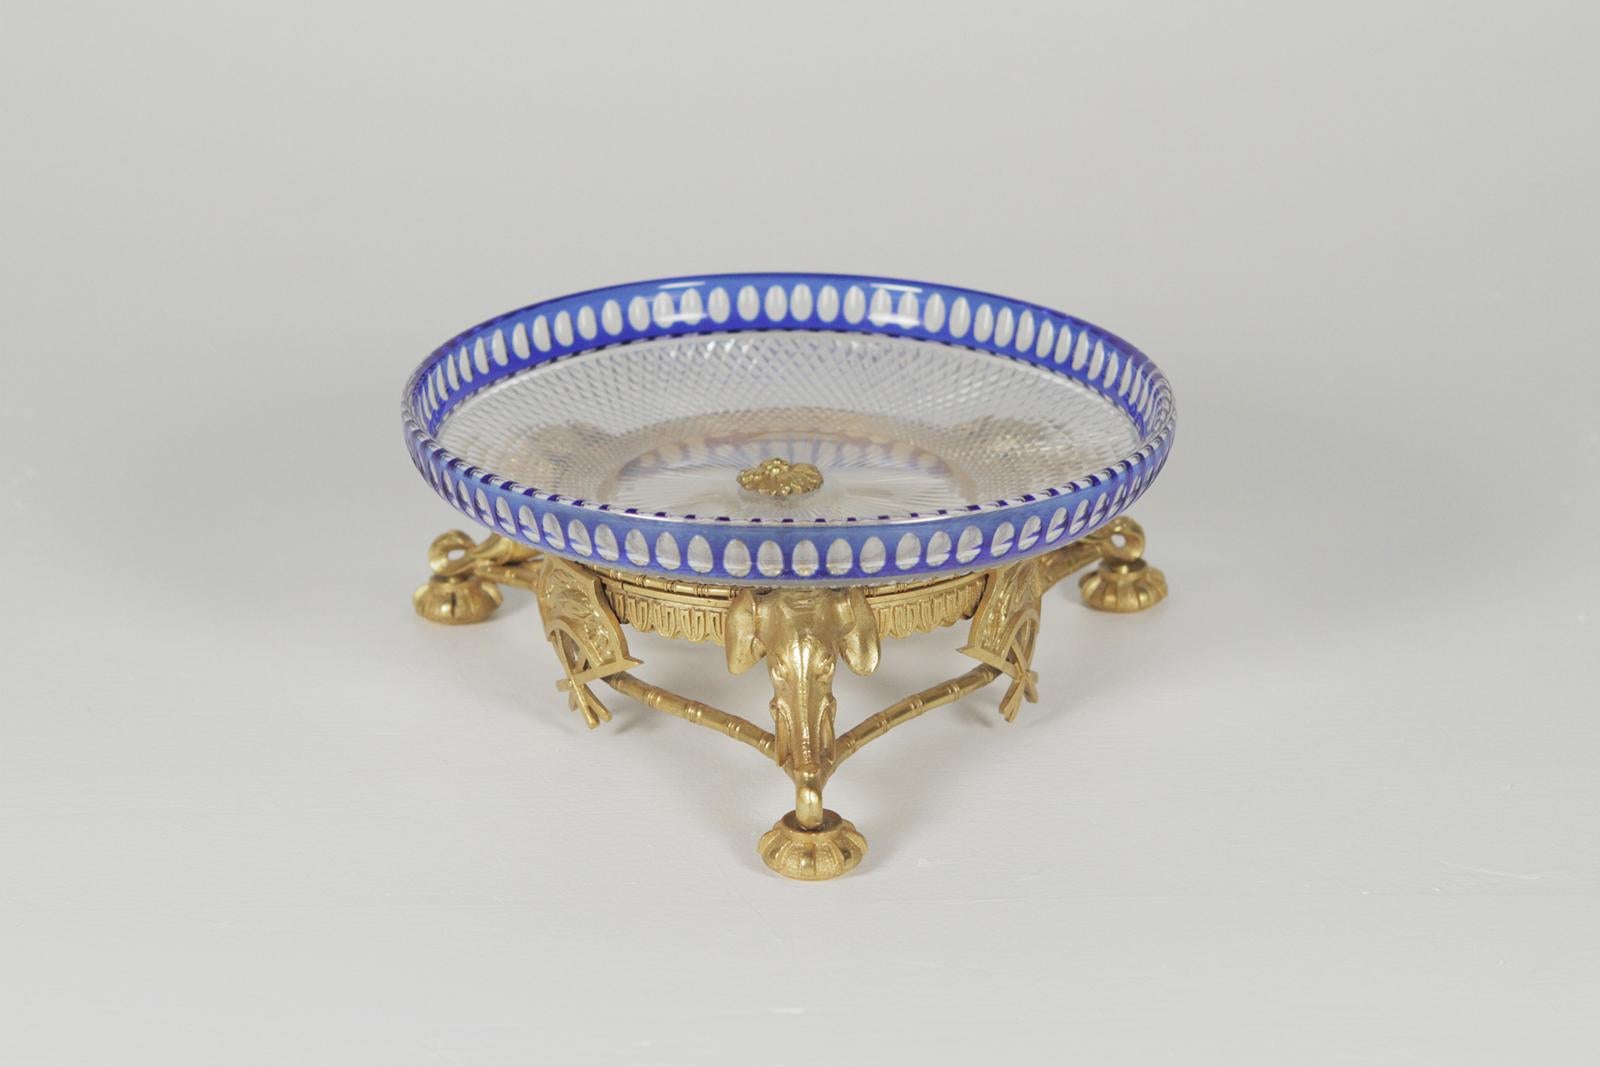 Beautiful crystal bowl on a gold gilt bronze base with elephant motif accents. The handcut cobalt cut to clear dish attributed to Val St Lambert, circa 1900.